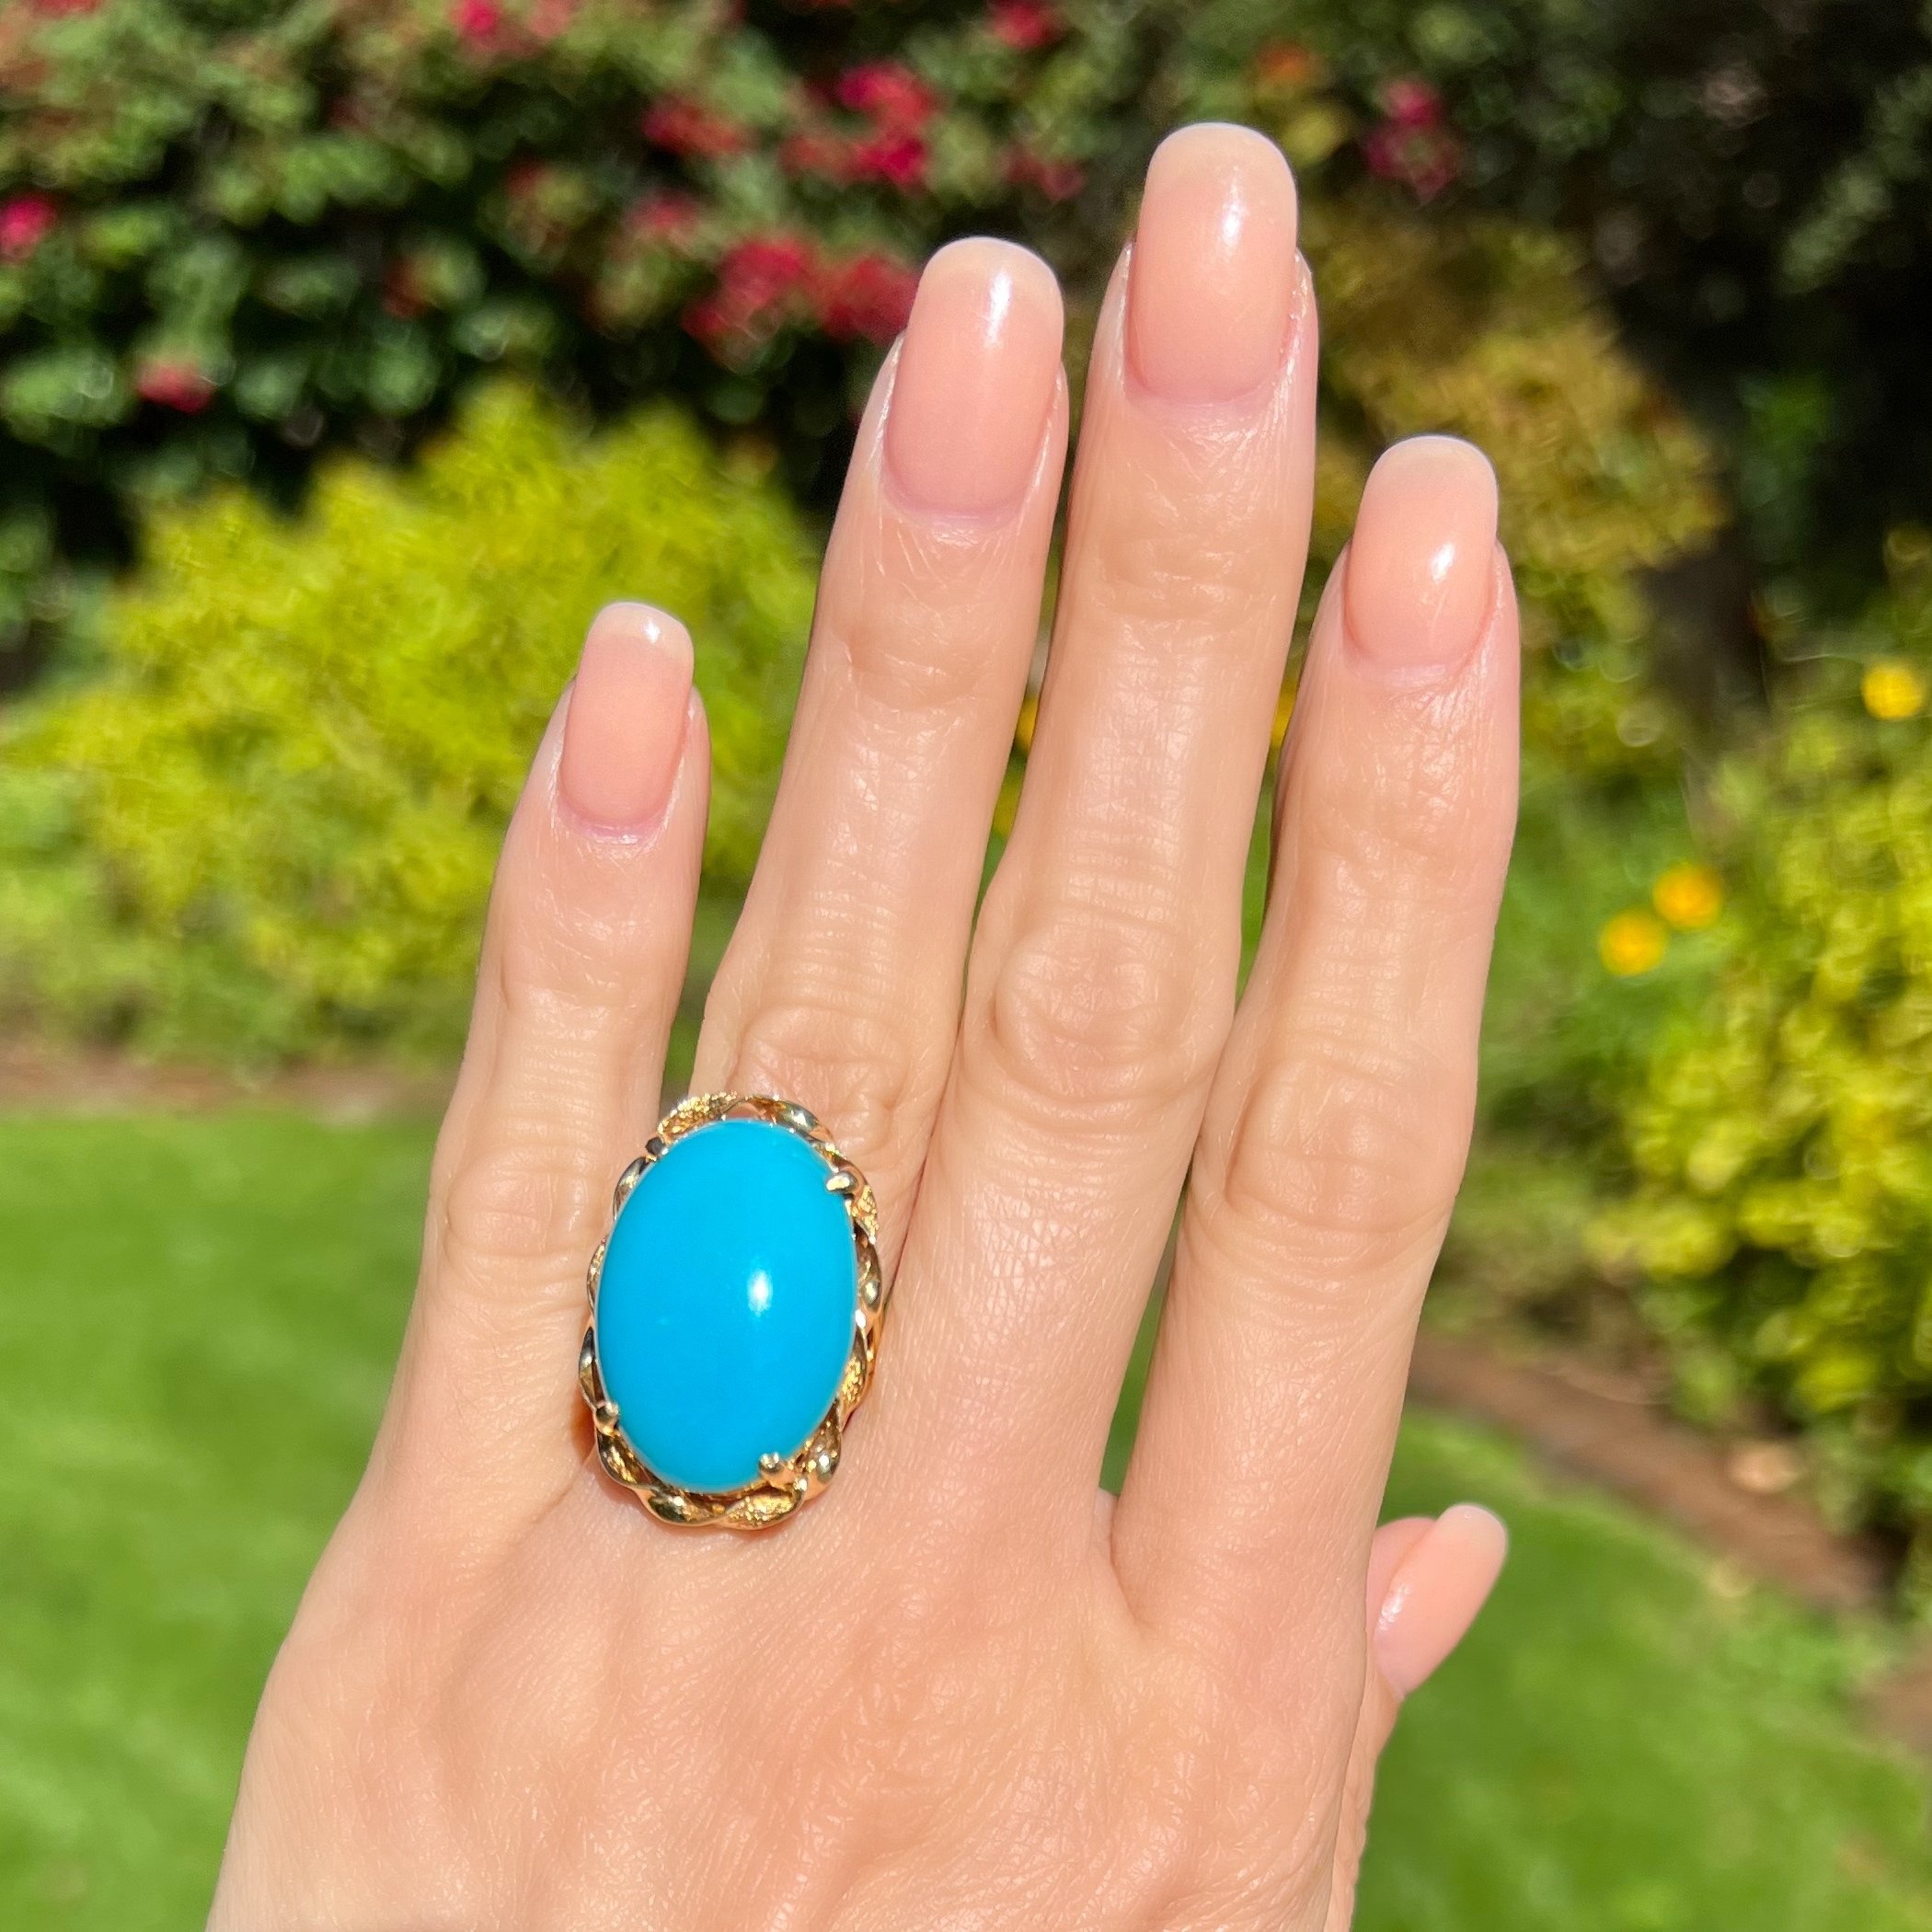 Gorgeous 925 Silver Prong Set Turquoise Ring